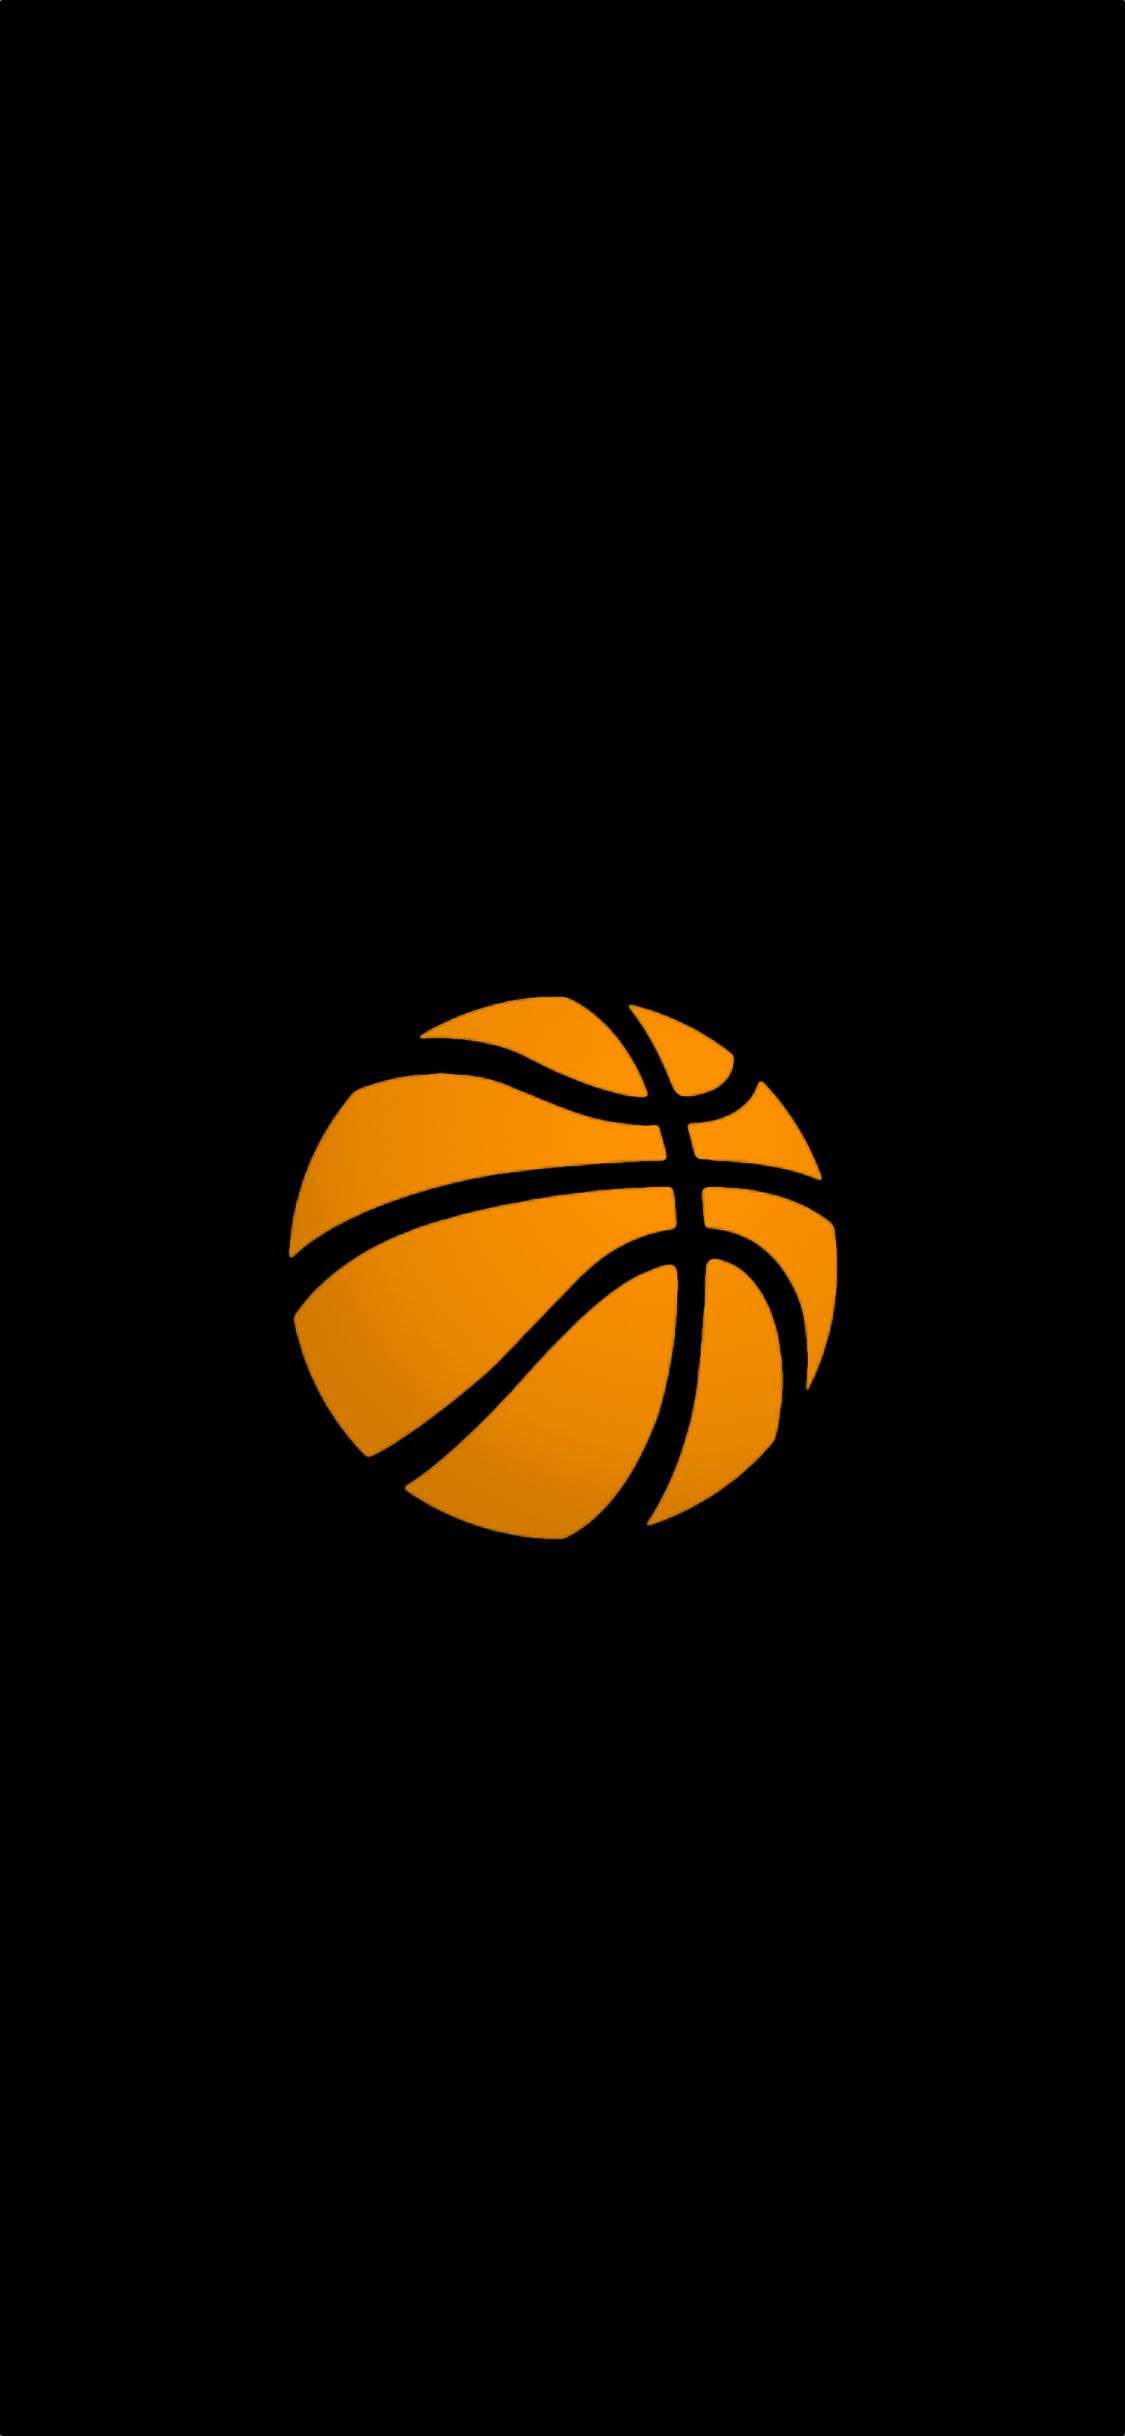 Cool Basketball Wallpaper For iPhone